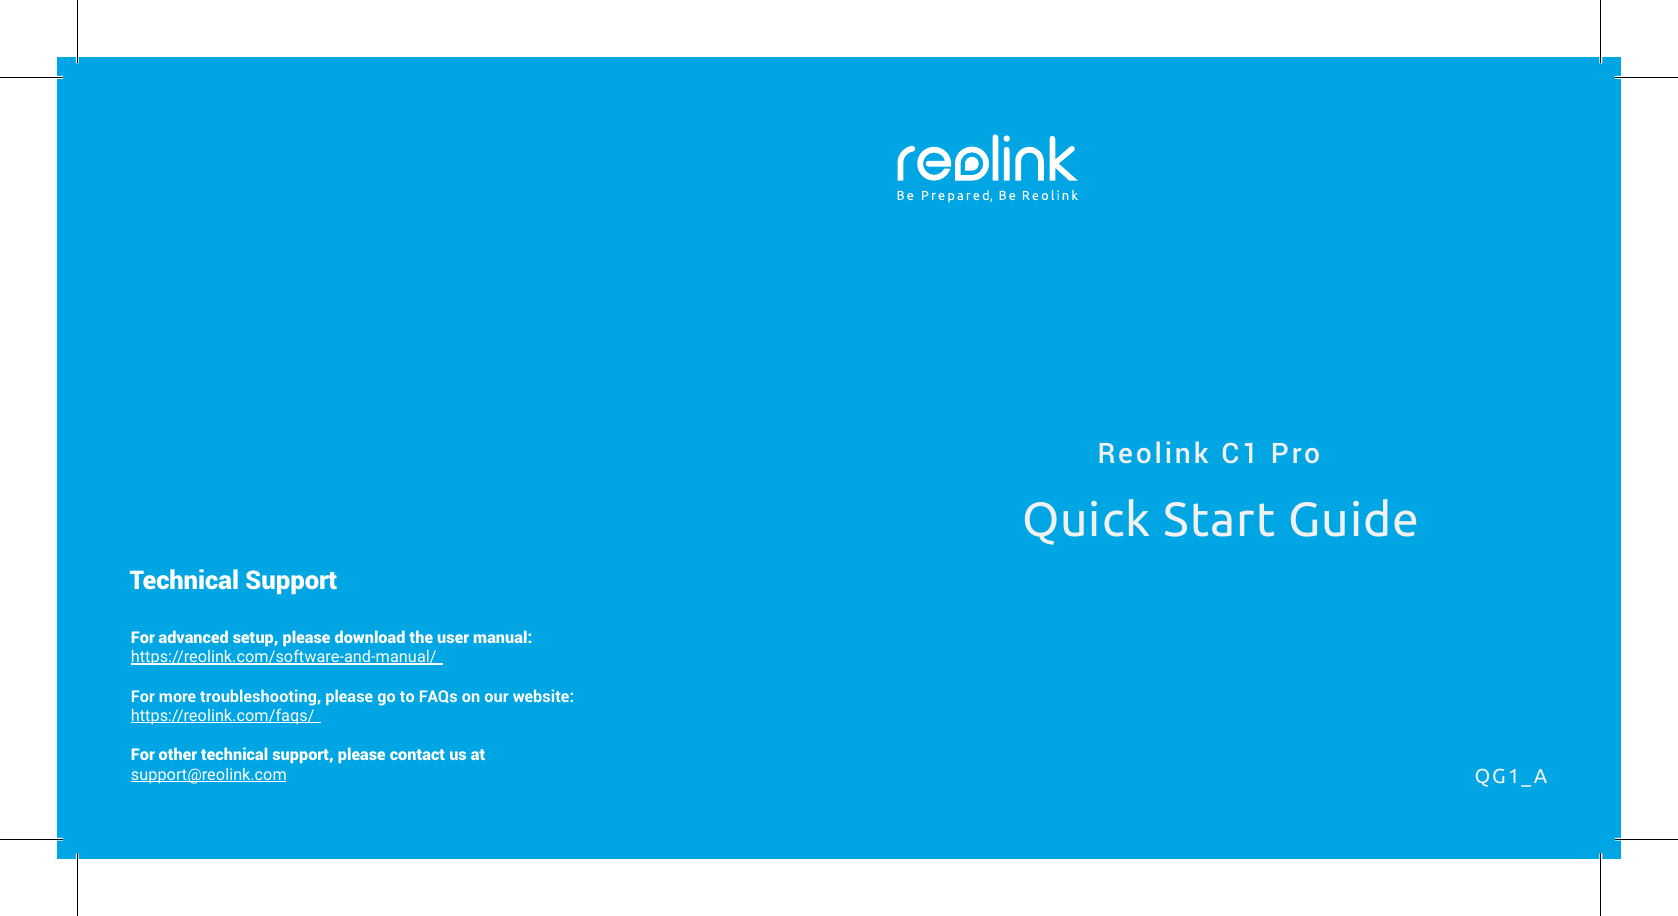 For advanced setup, please download the user manual:https://reolink.com/software-and-manual/For more troubleshooting, please go to FAQs on our website:https://reolink.com/faqs/For other technical support, please contact us atsupport@reolink.comTechnical SupportReolink C1 ProQuick Start GuideQG1_A